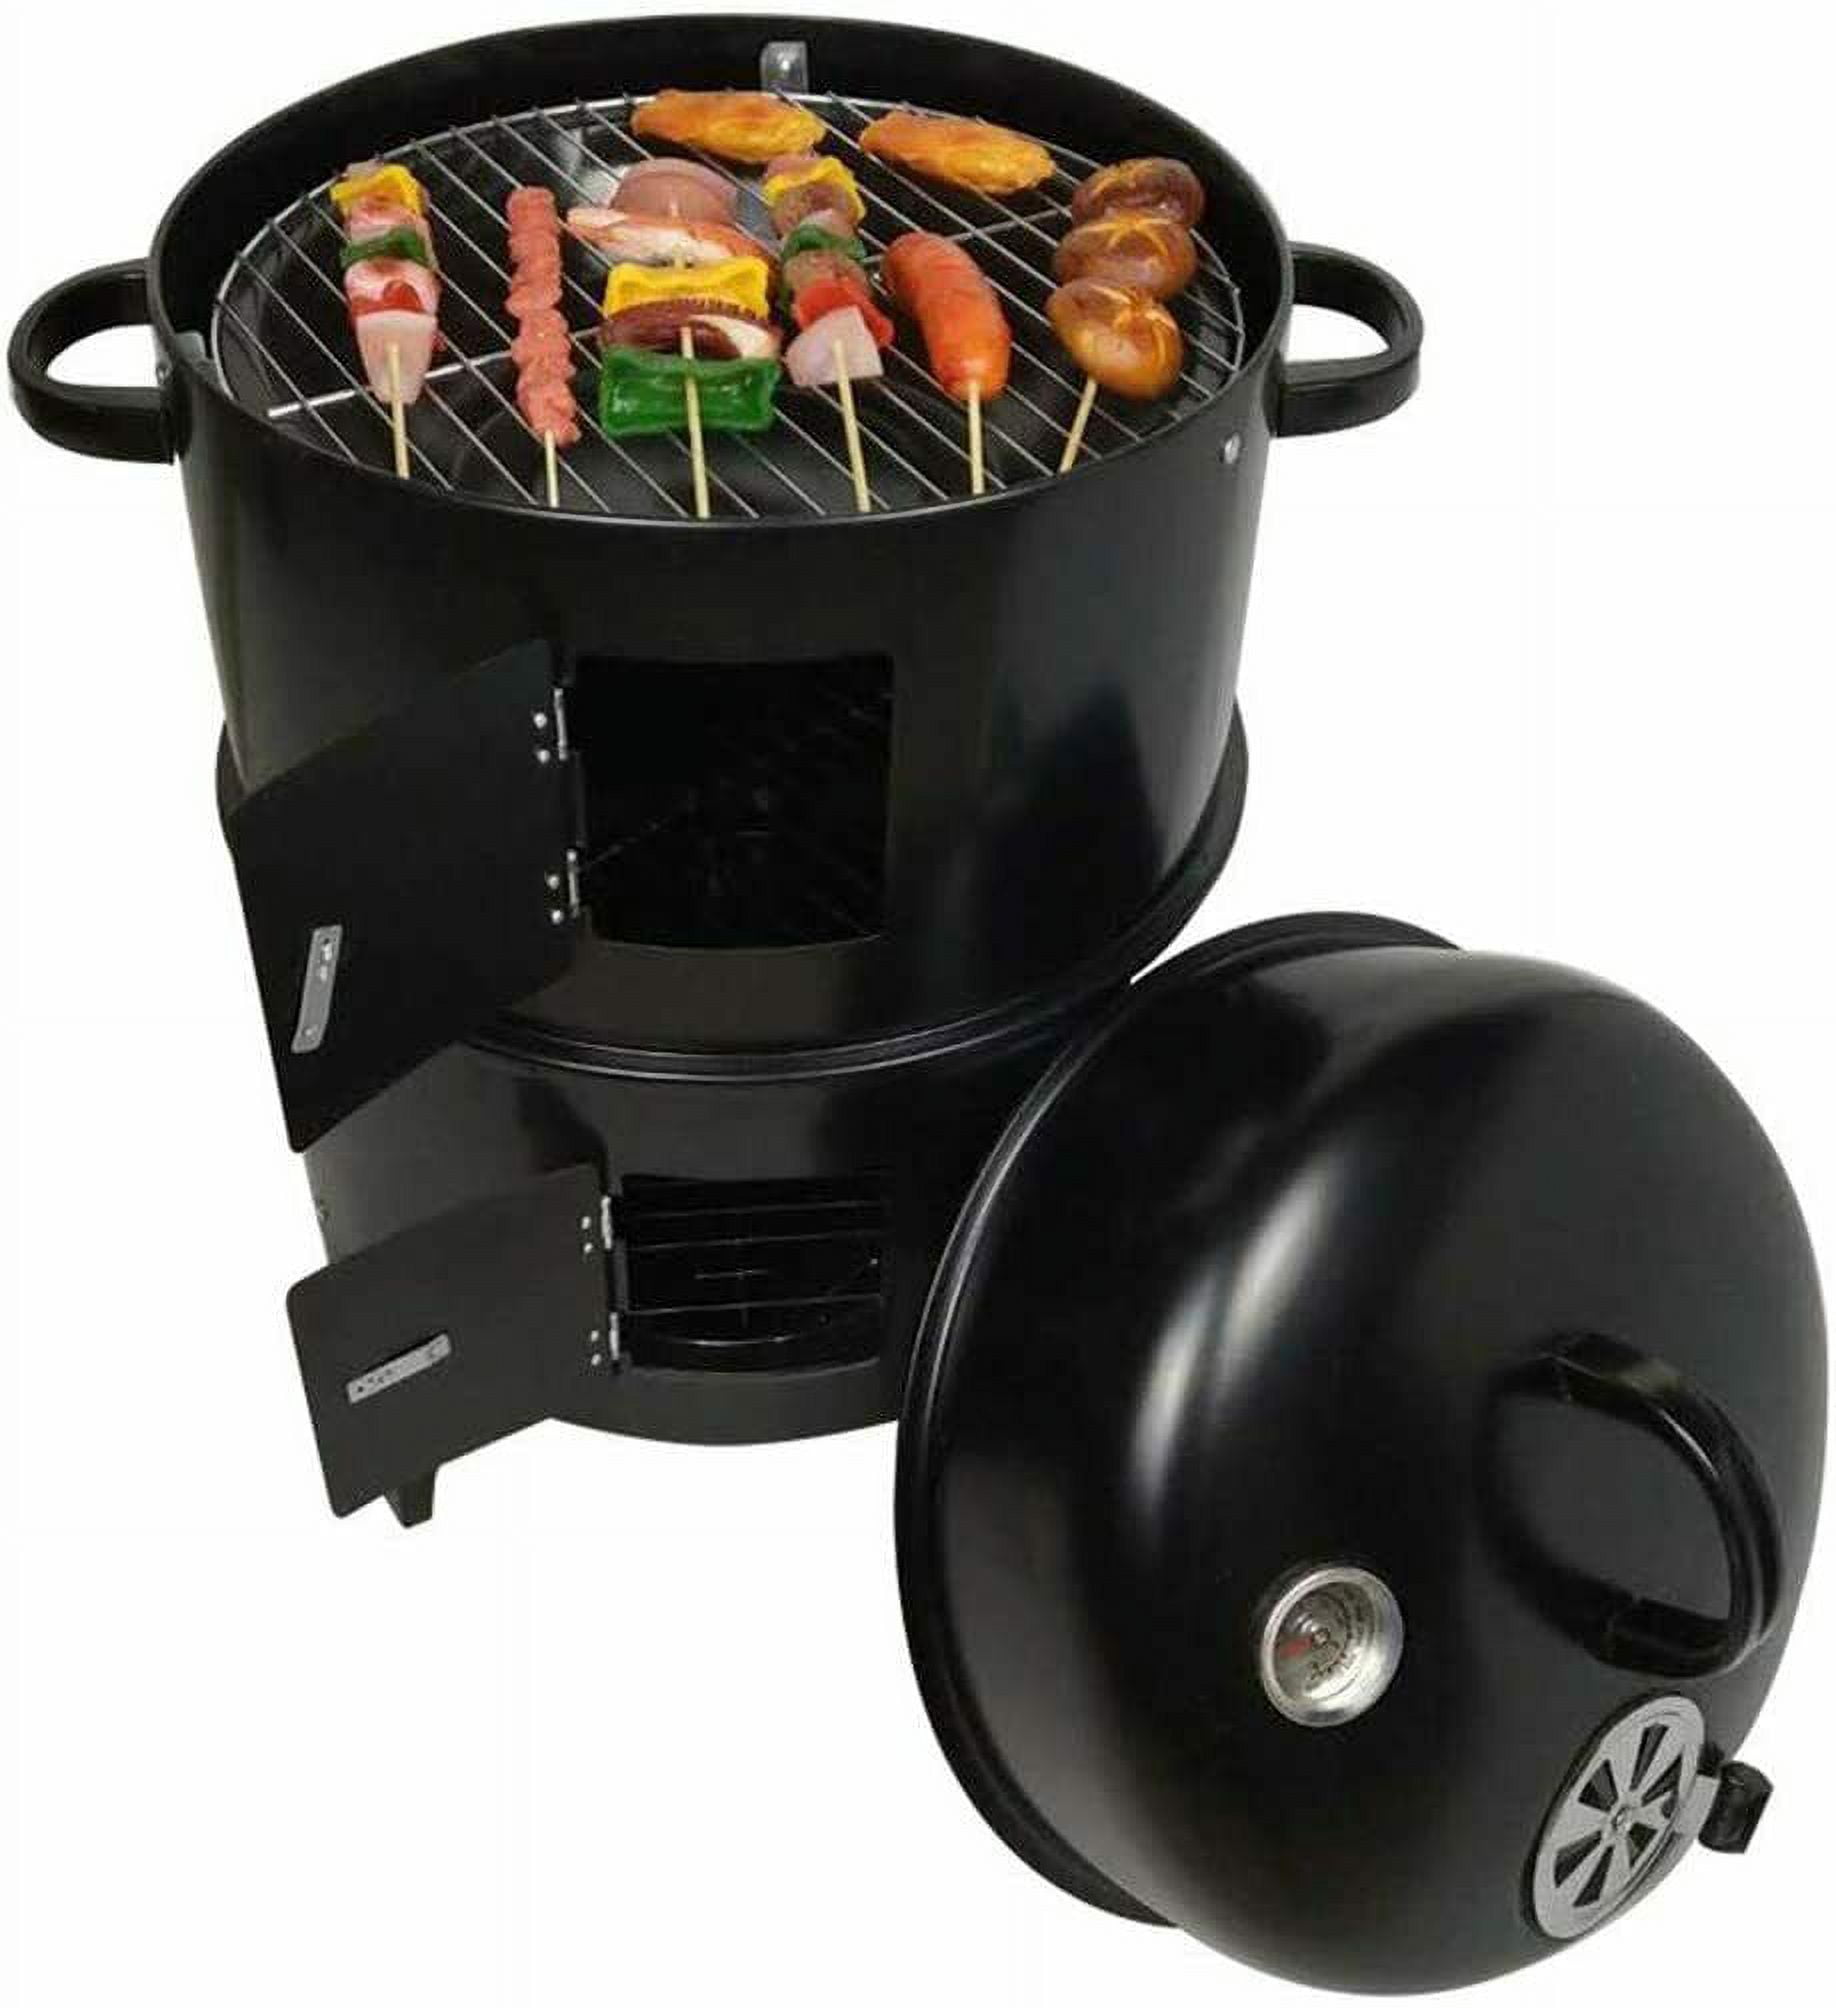 Grill 3-in-1 Hunting Cooking for Backyard Charcoal Smoker Hiking Vertical BBQ Camping Round Grill Smoker Party Outdoor Family Grill 3-Tier Suitable Barbeque